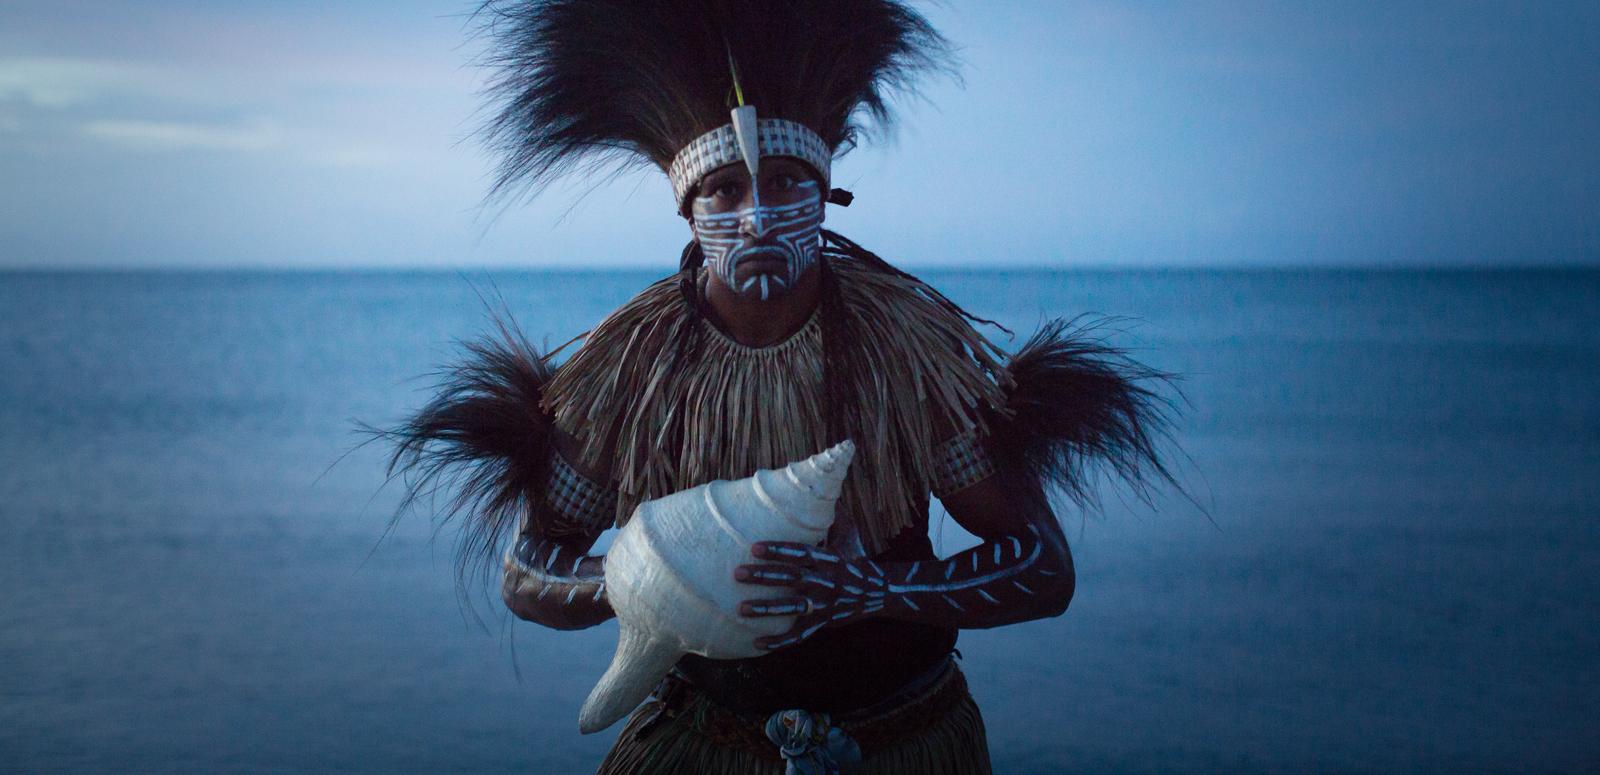 Image featuring Indigenous Francis Williams of the Naygayiw Gigi Dance Troupe in costume standing in front of the sea